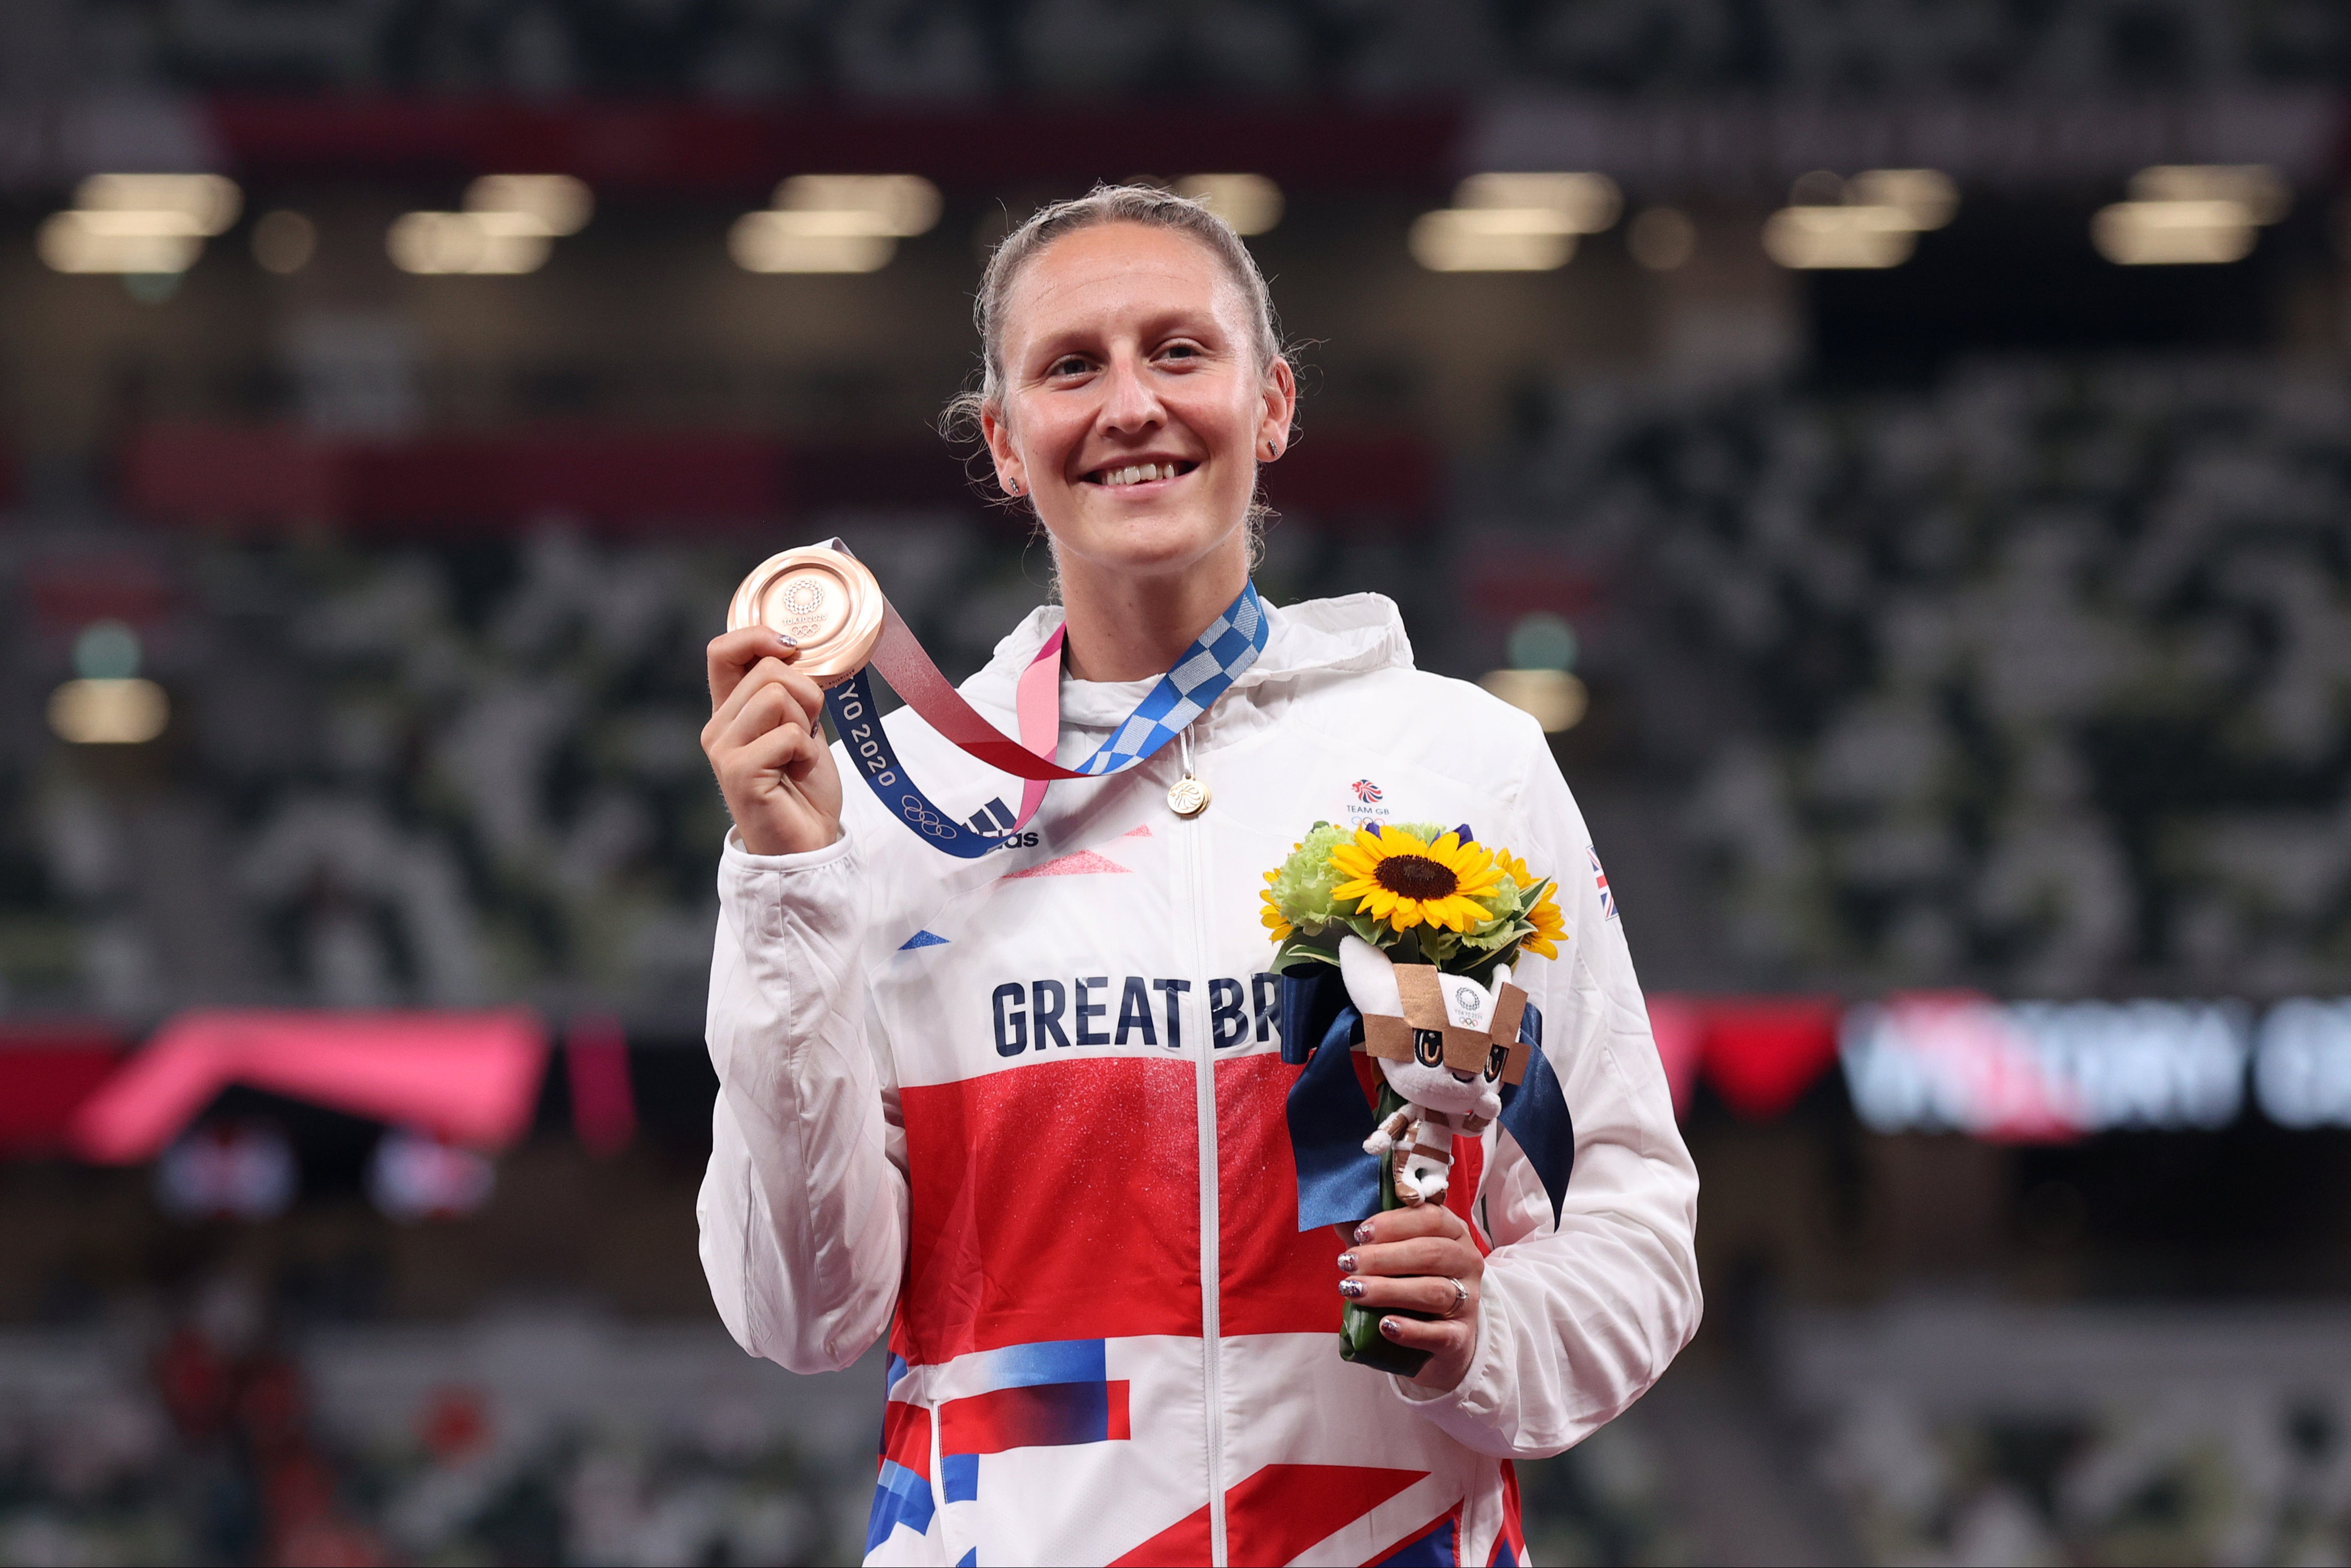 Holly Bradshaw finished third at the Tokyo Olympics